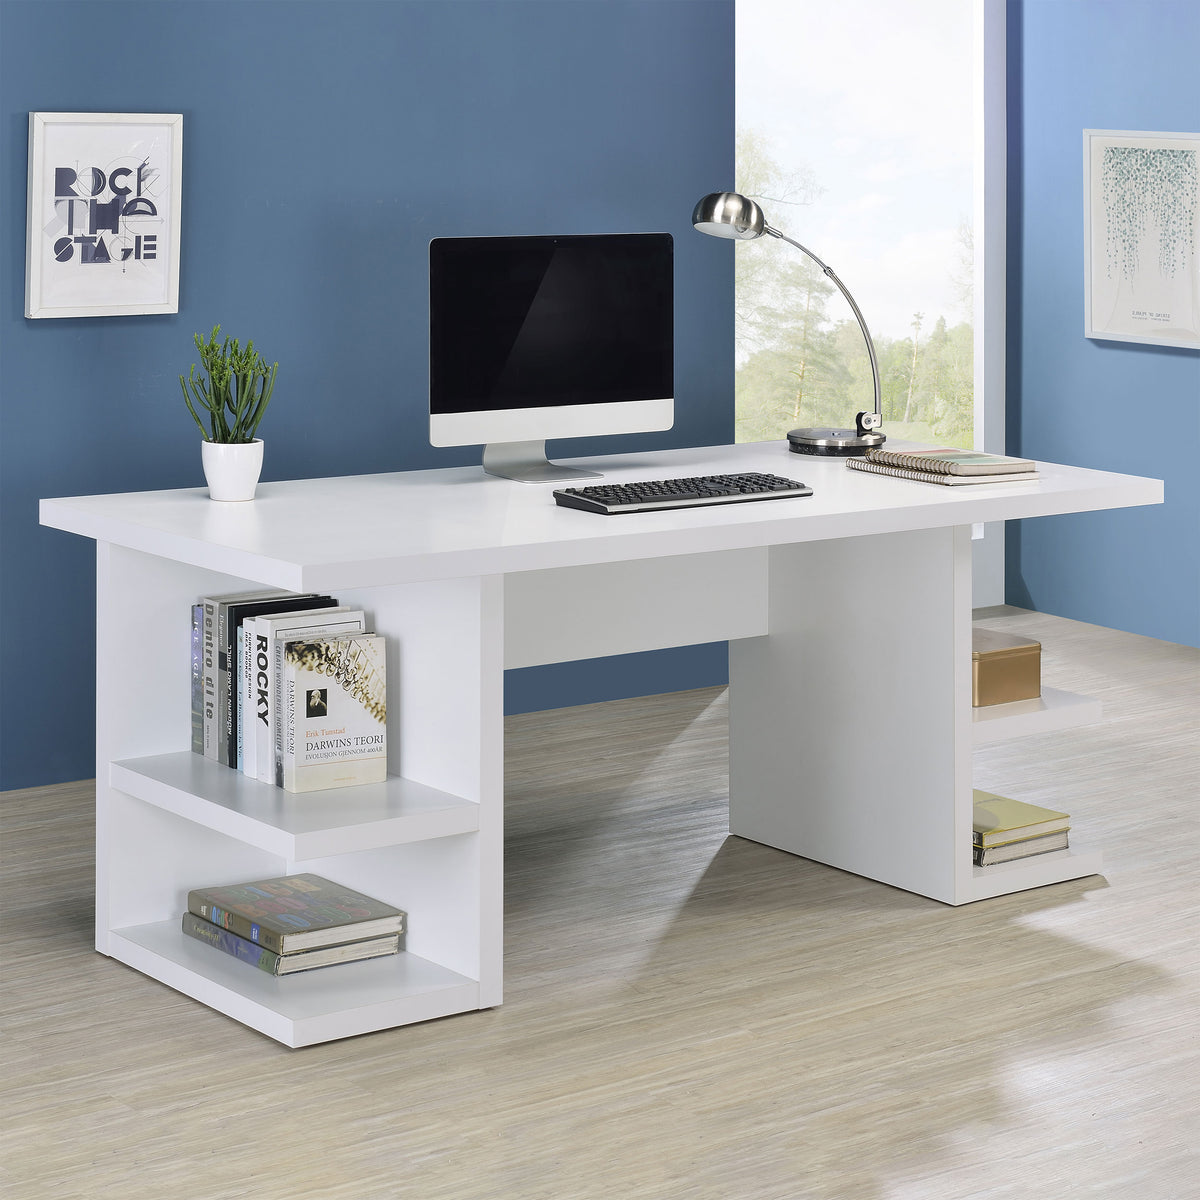 Alice Writing Desk White with Open Shelves Alice Writing Desk White with Open Shelves Half Price Furniture